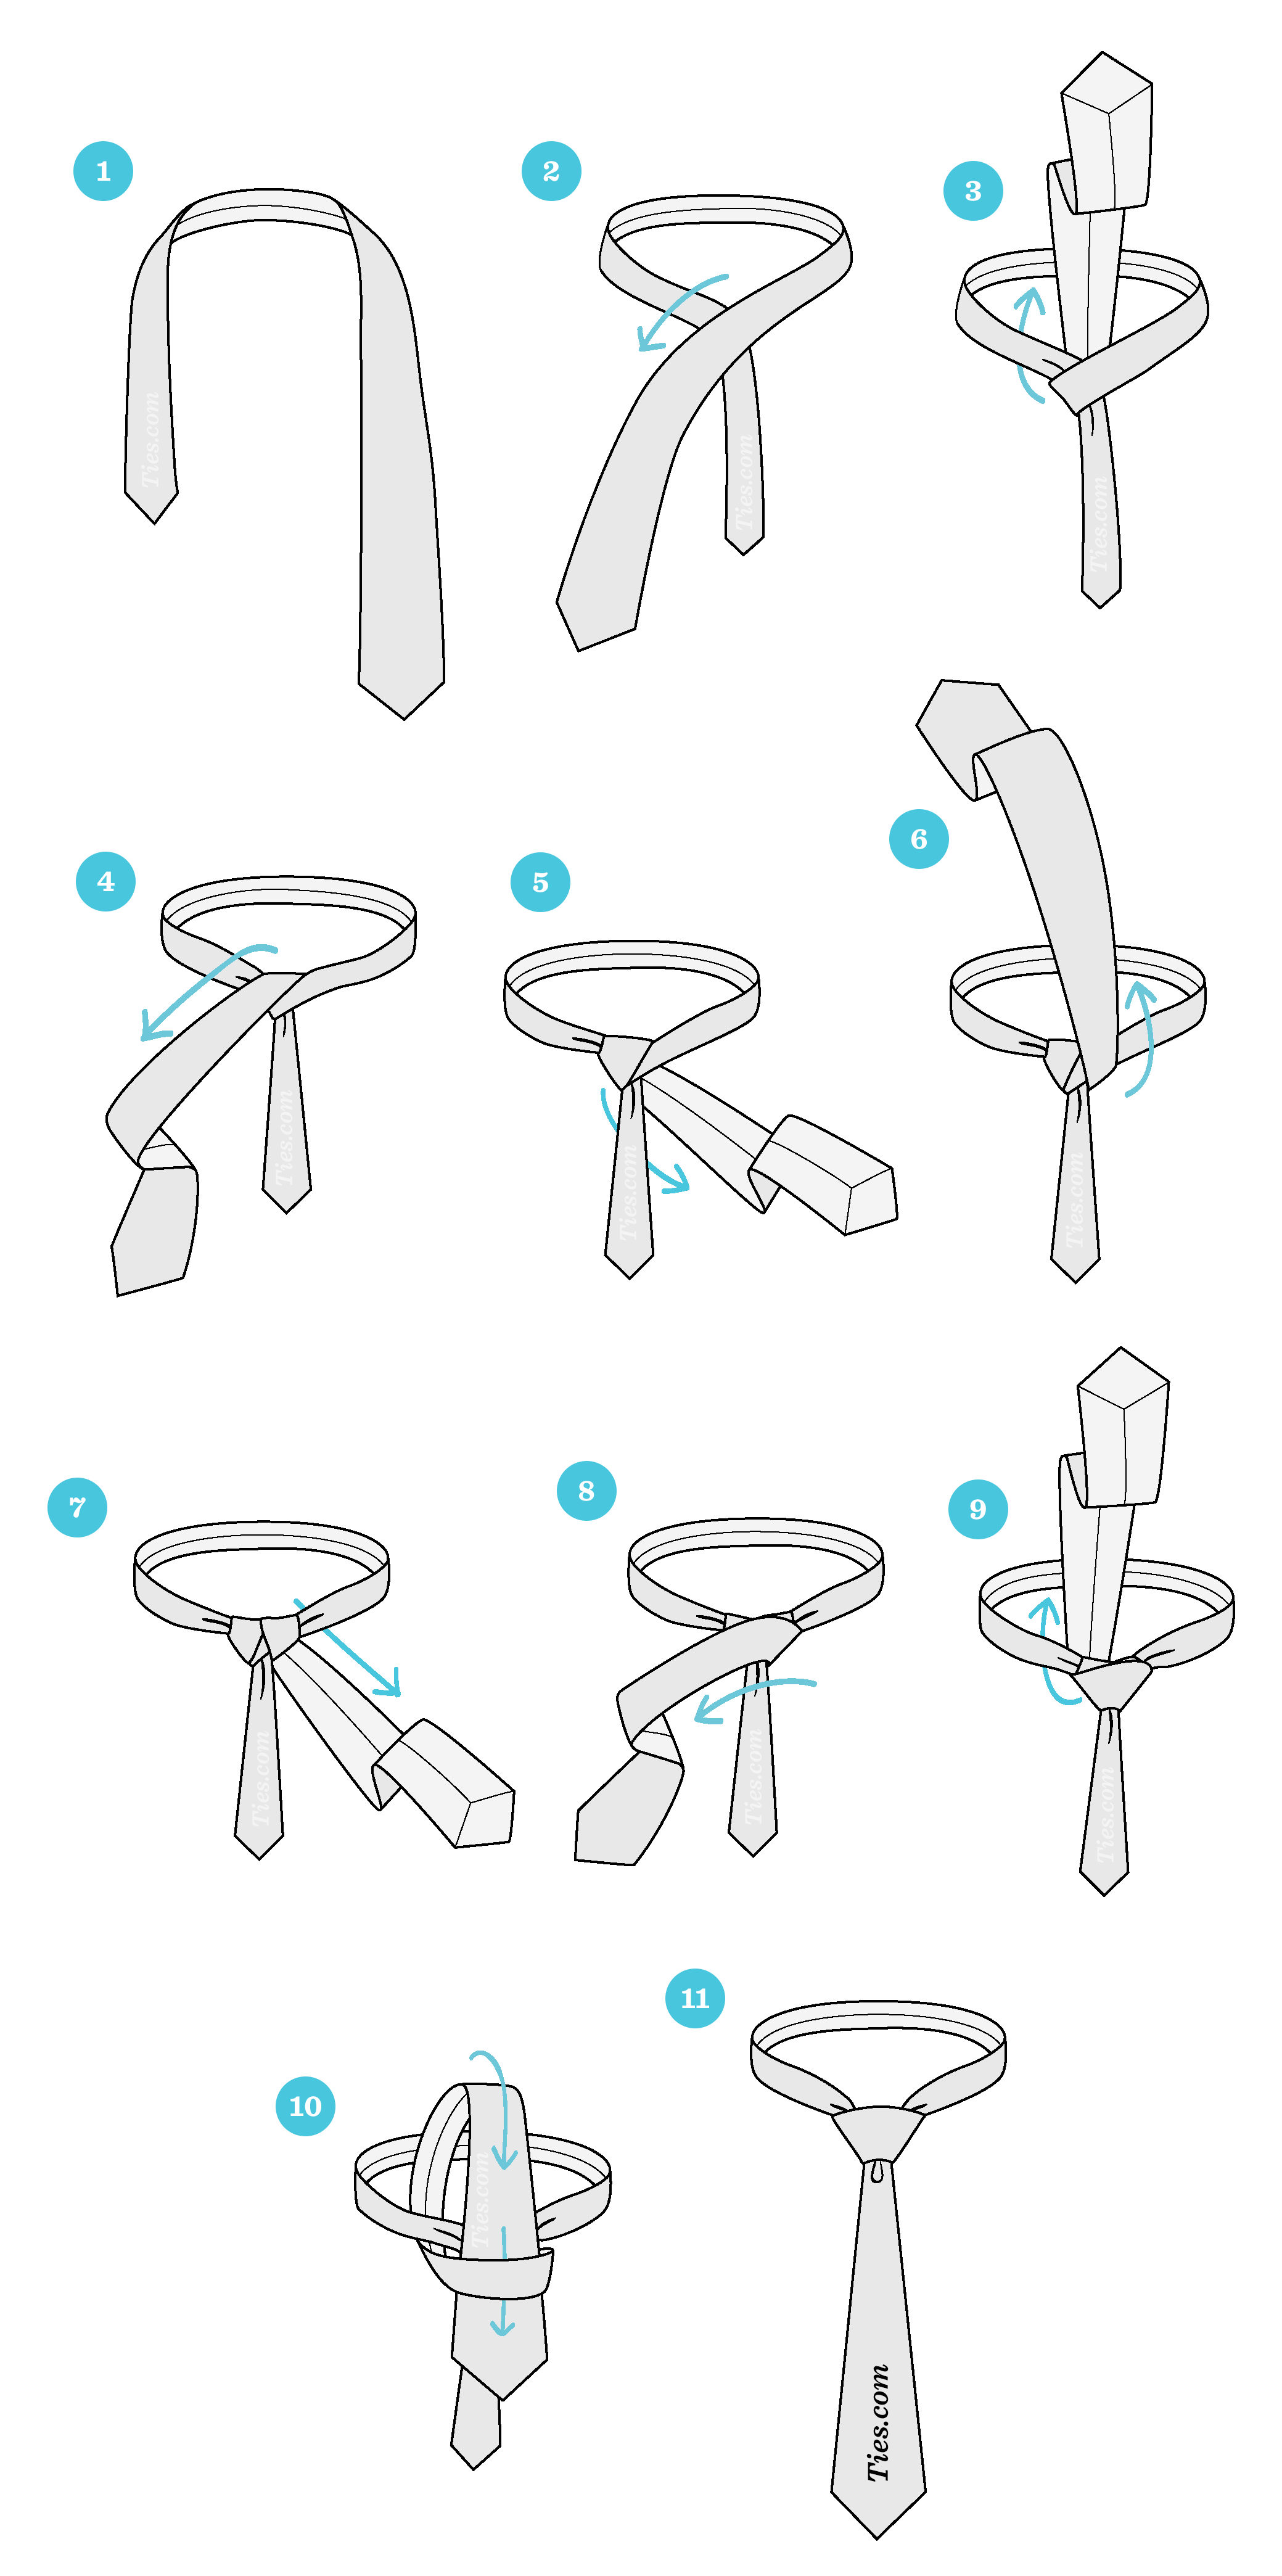 how to tie a knot step by step